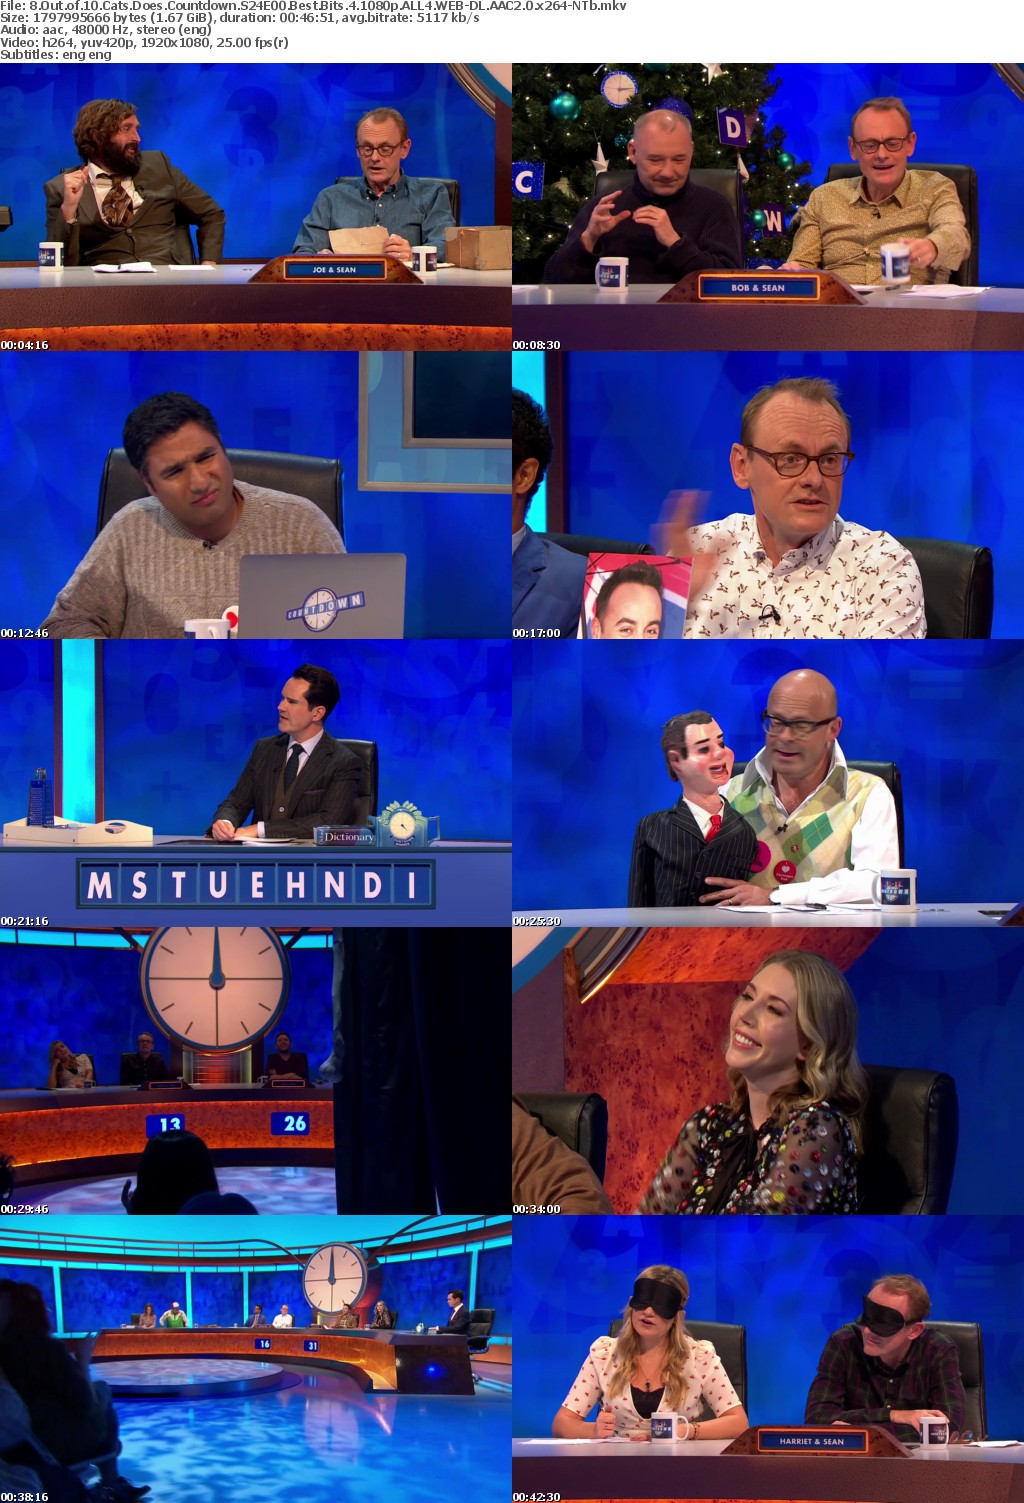 8 Out of 10 Cats Does Countdown S24E00 Best Bits 4 1080p ALL4 WEB-DL AAC2 0 x264-NTb